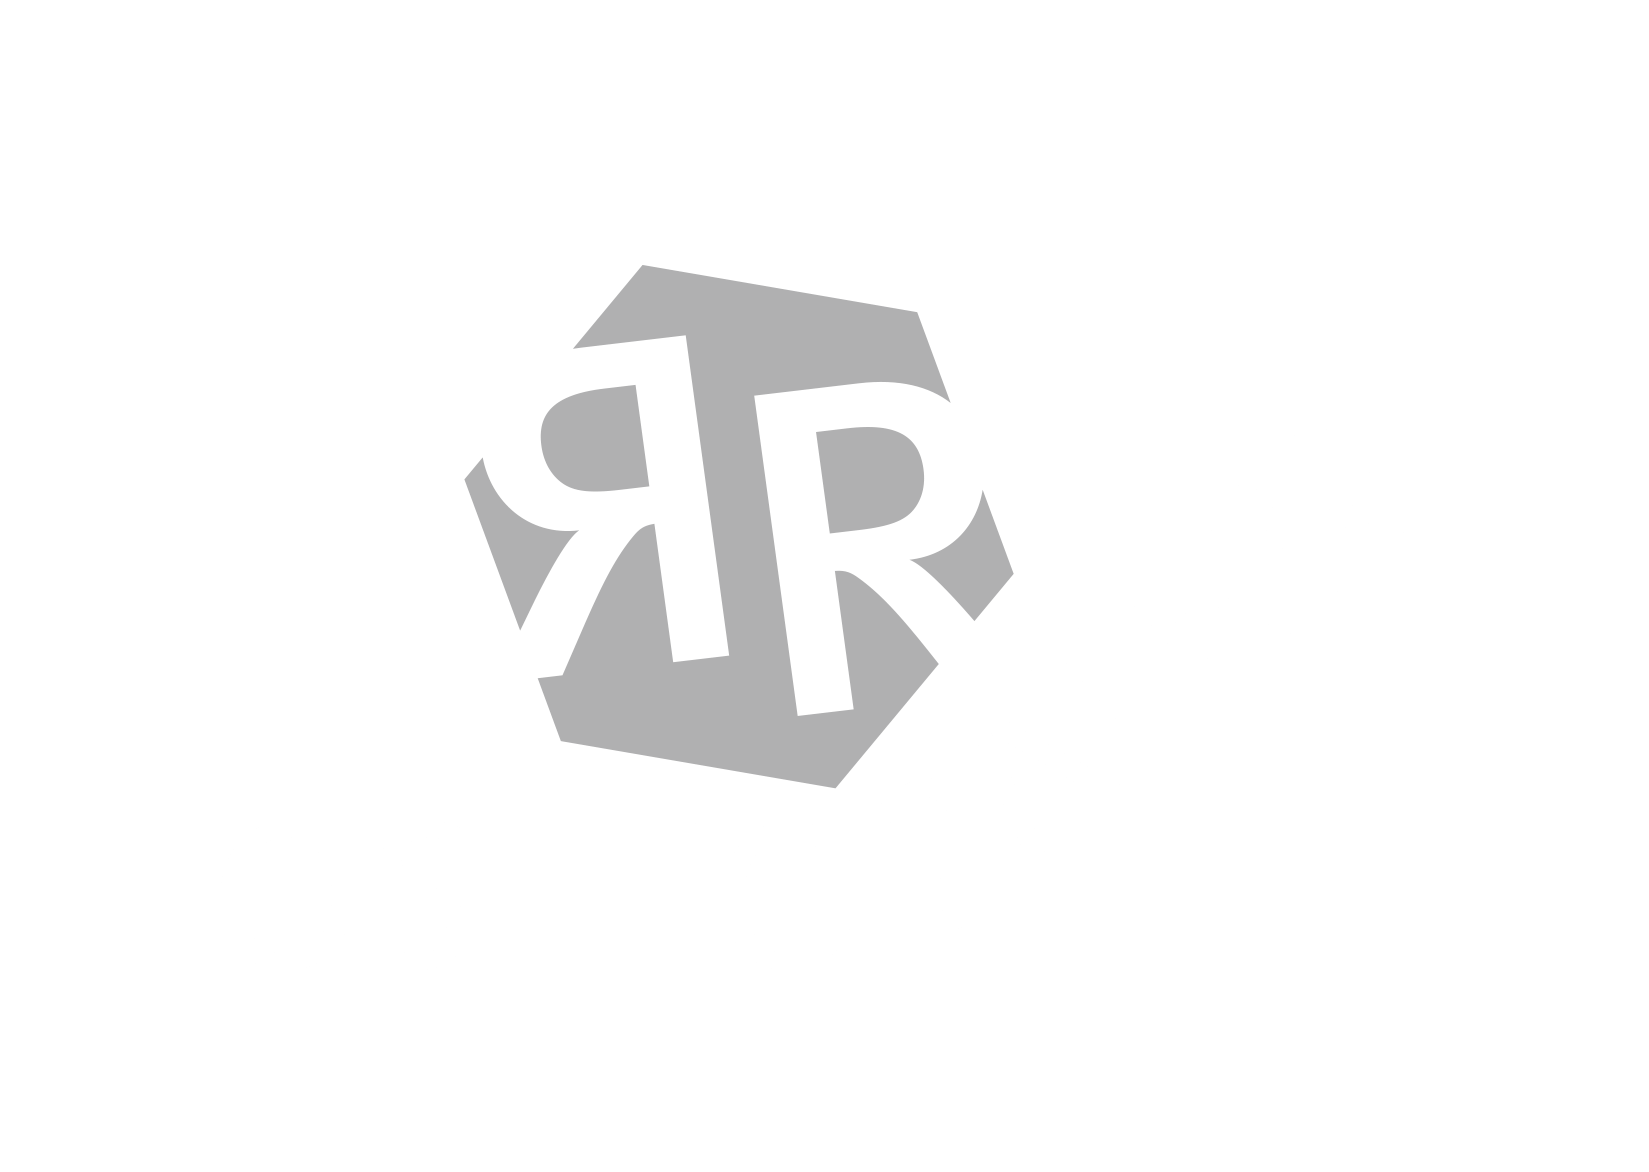 RR Osteopathie Basel - Ostepathie & Kiniseologie